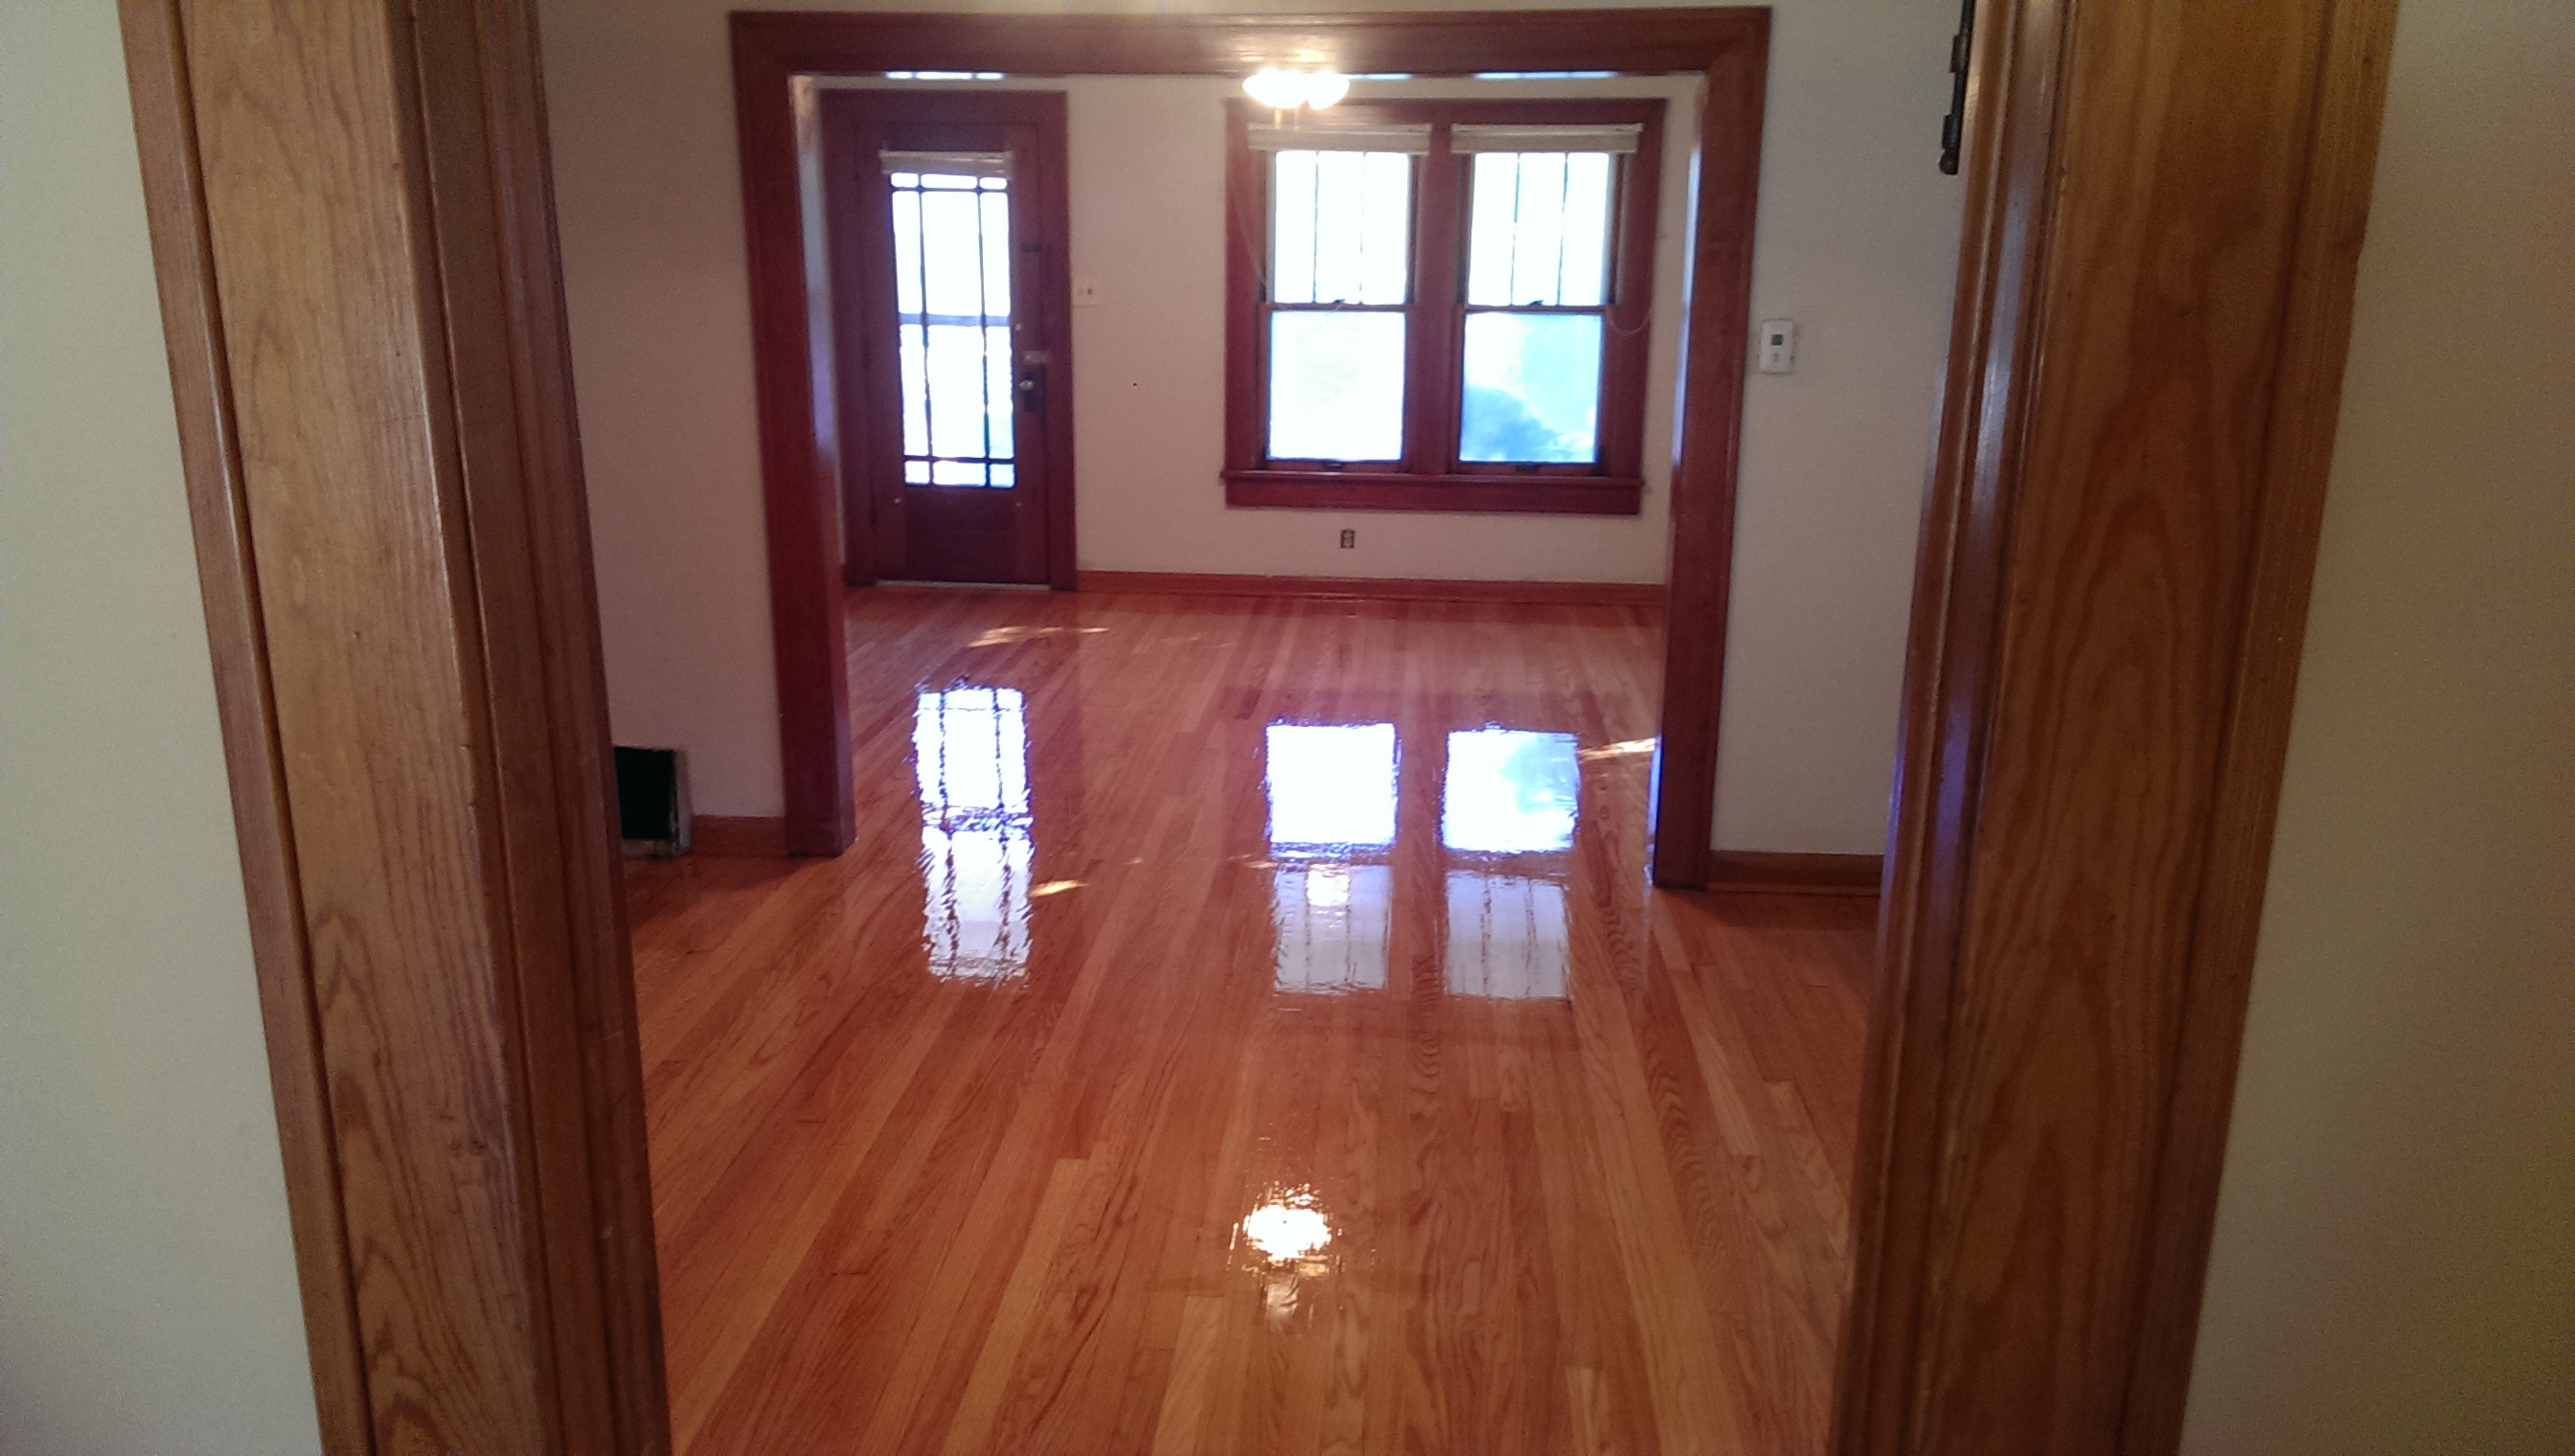 totta hardwood flooring kansas city mo of ponderosa hardwood flooring kansas city floor saltbox texture with down the hardwoods gold flooring more with and floors in city outside indoors hardwood to floor kansas